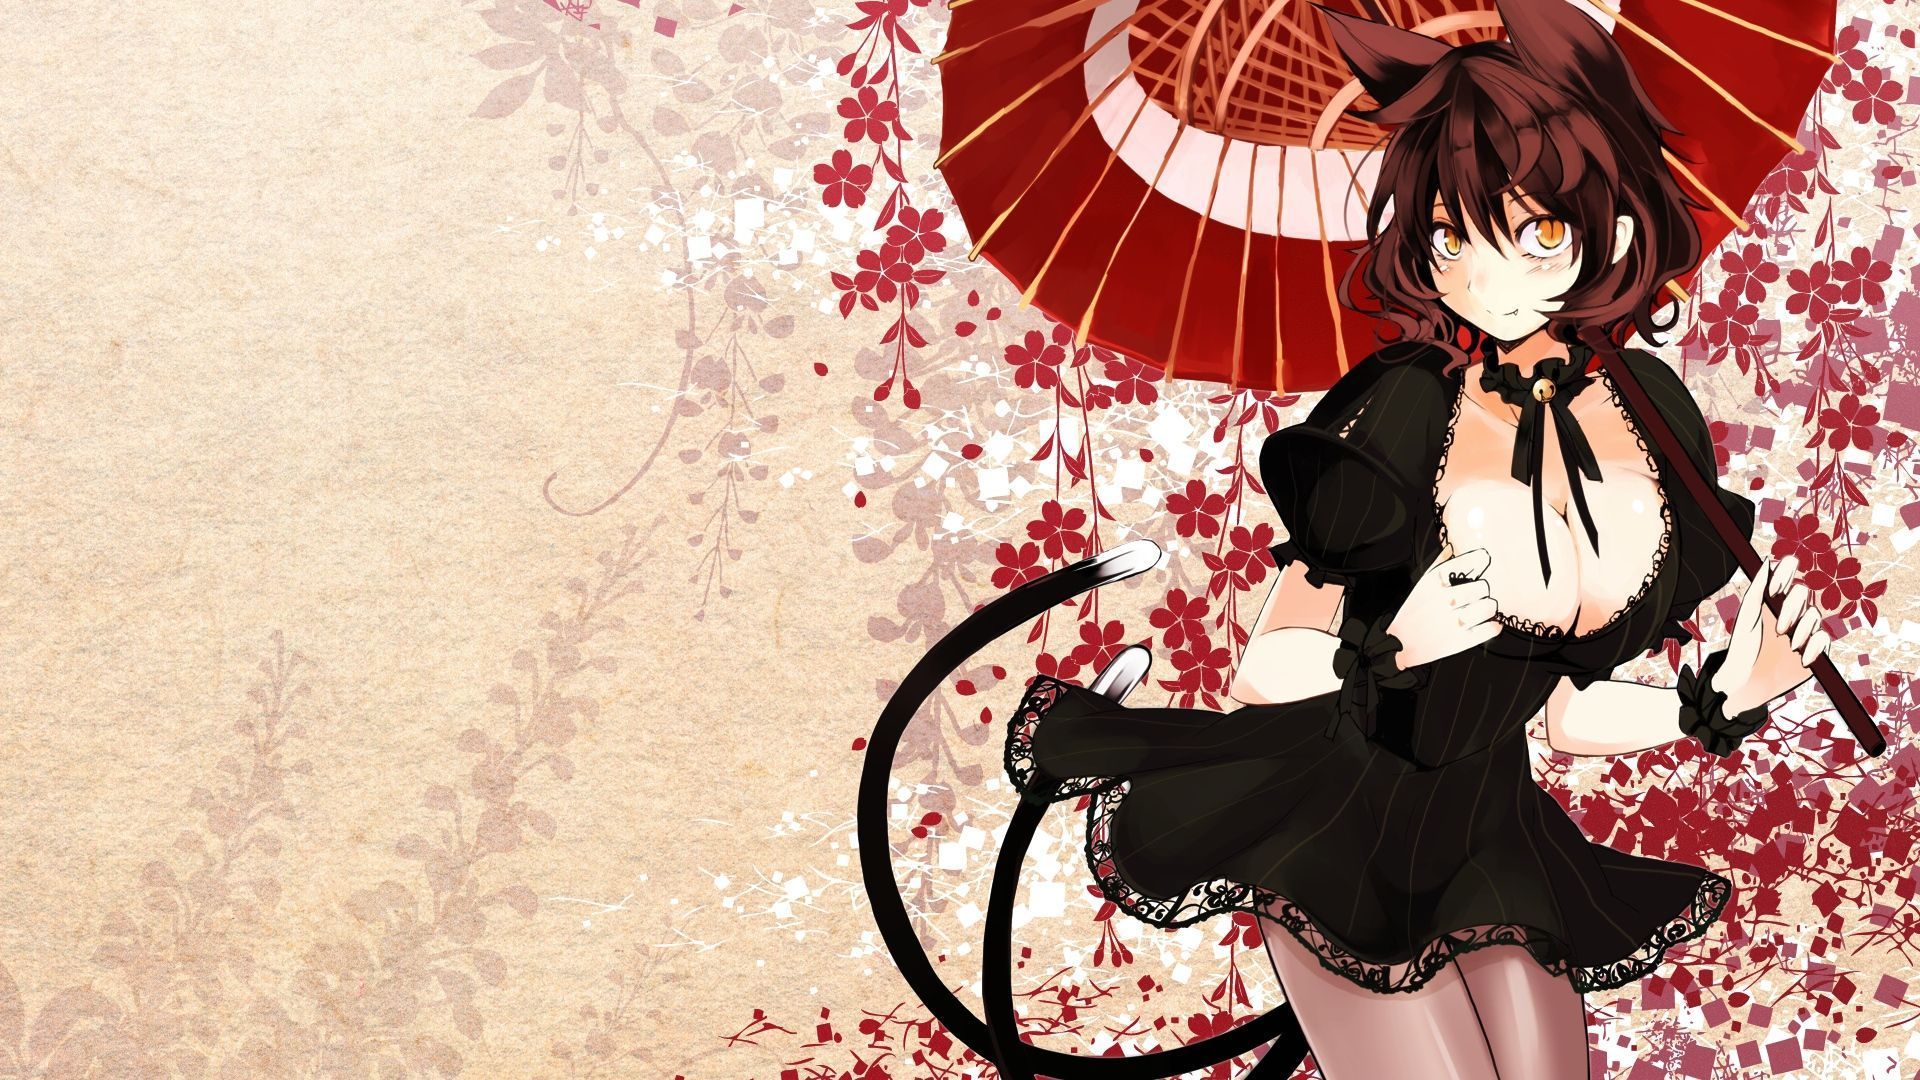 10 Best Wallpapers Hd Anime 1920X1080 FULL HD 1080p For PC